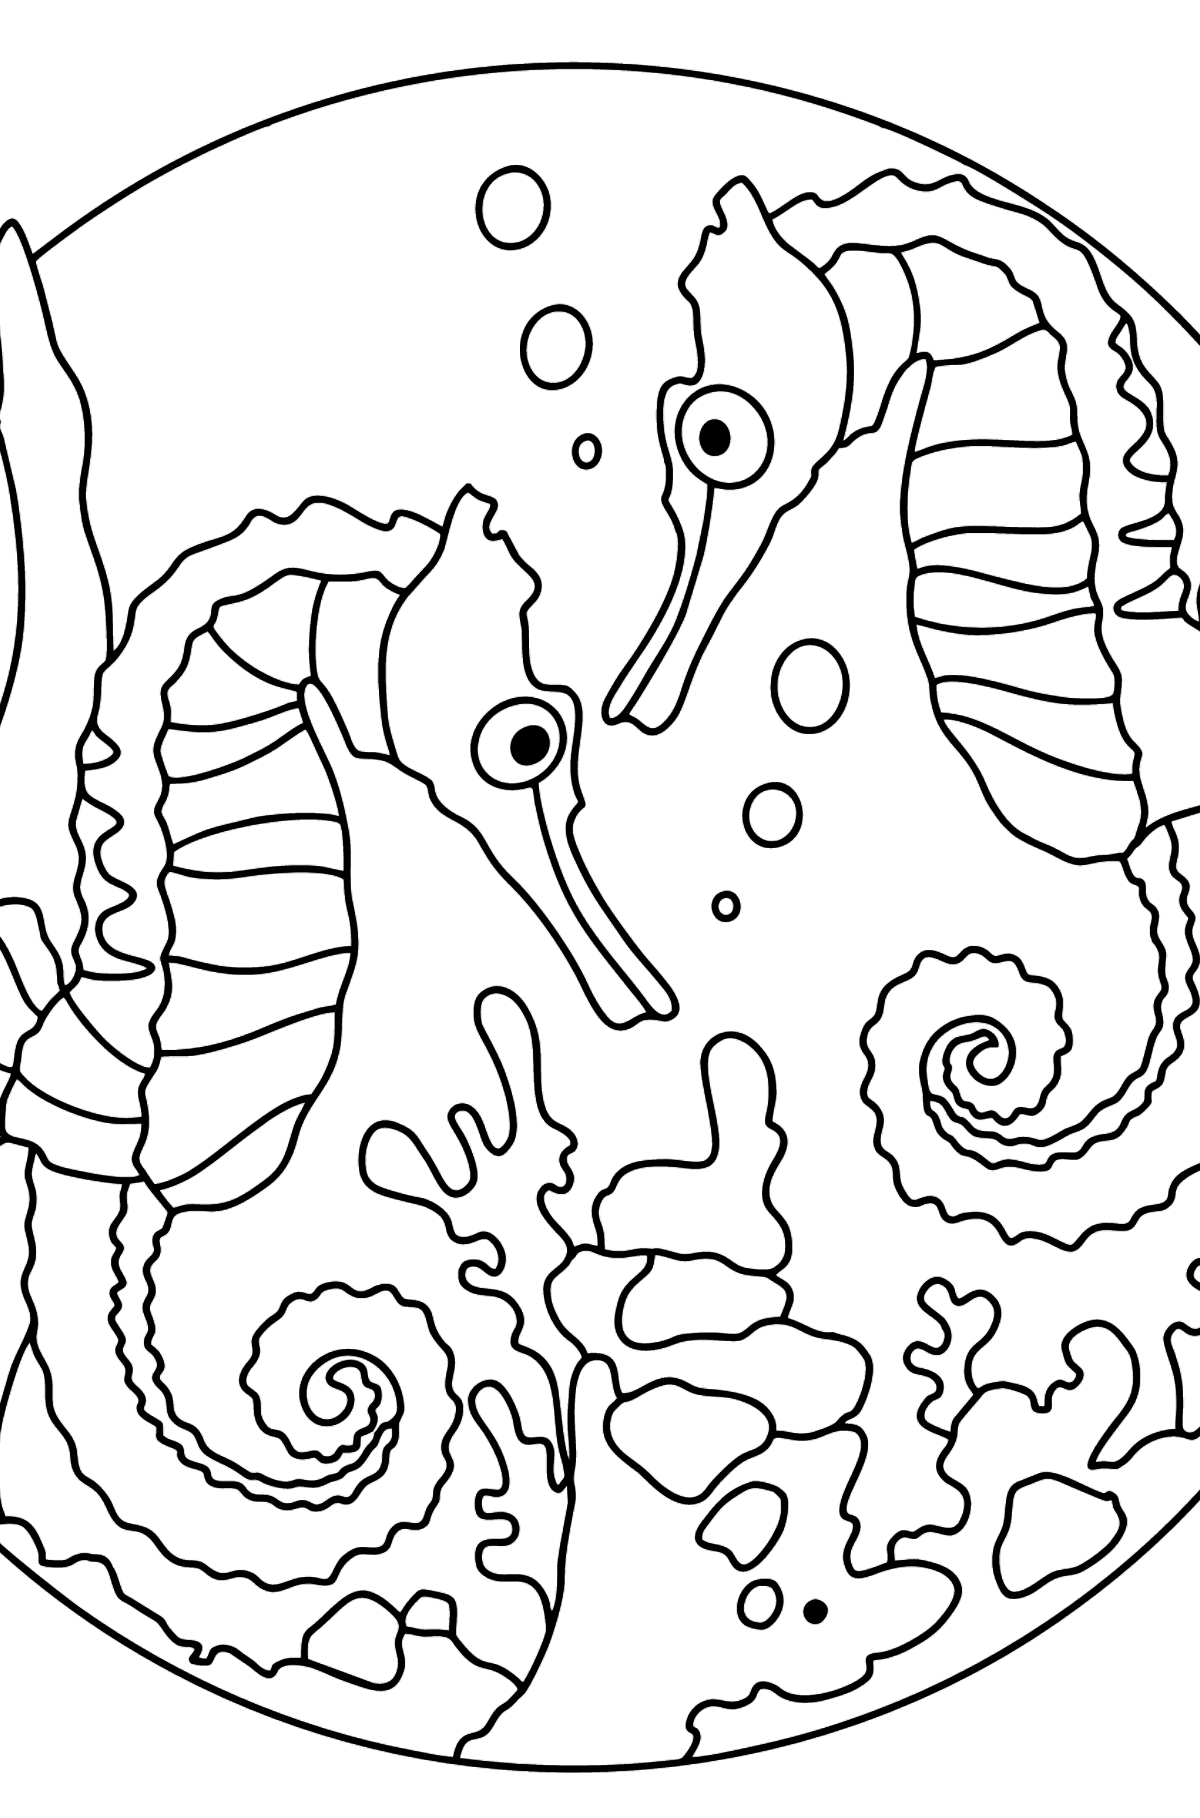 Seahorses Coloring Page - Coloring Pages for Kids